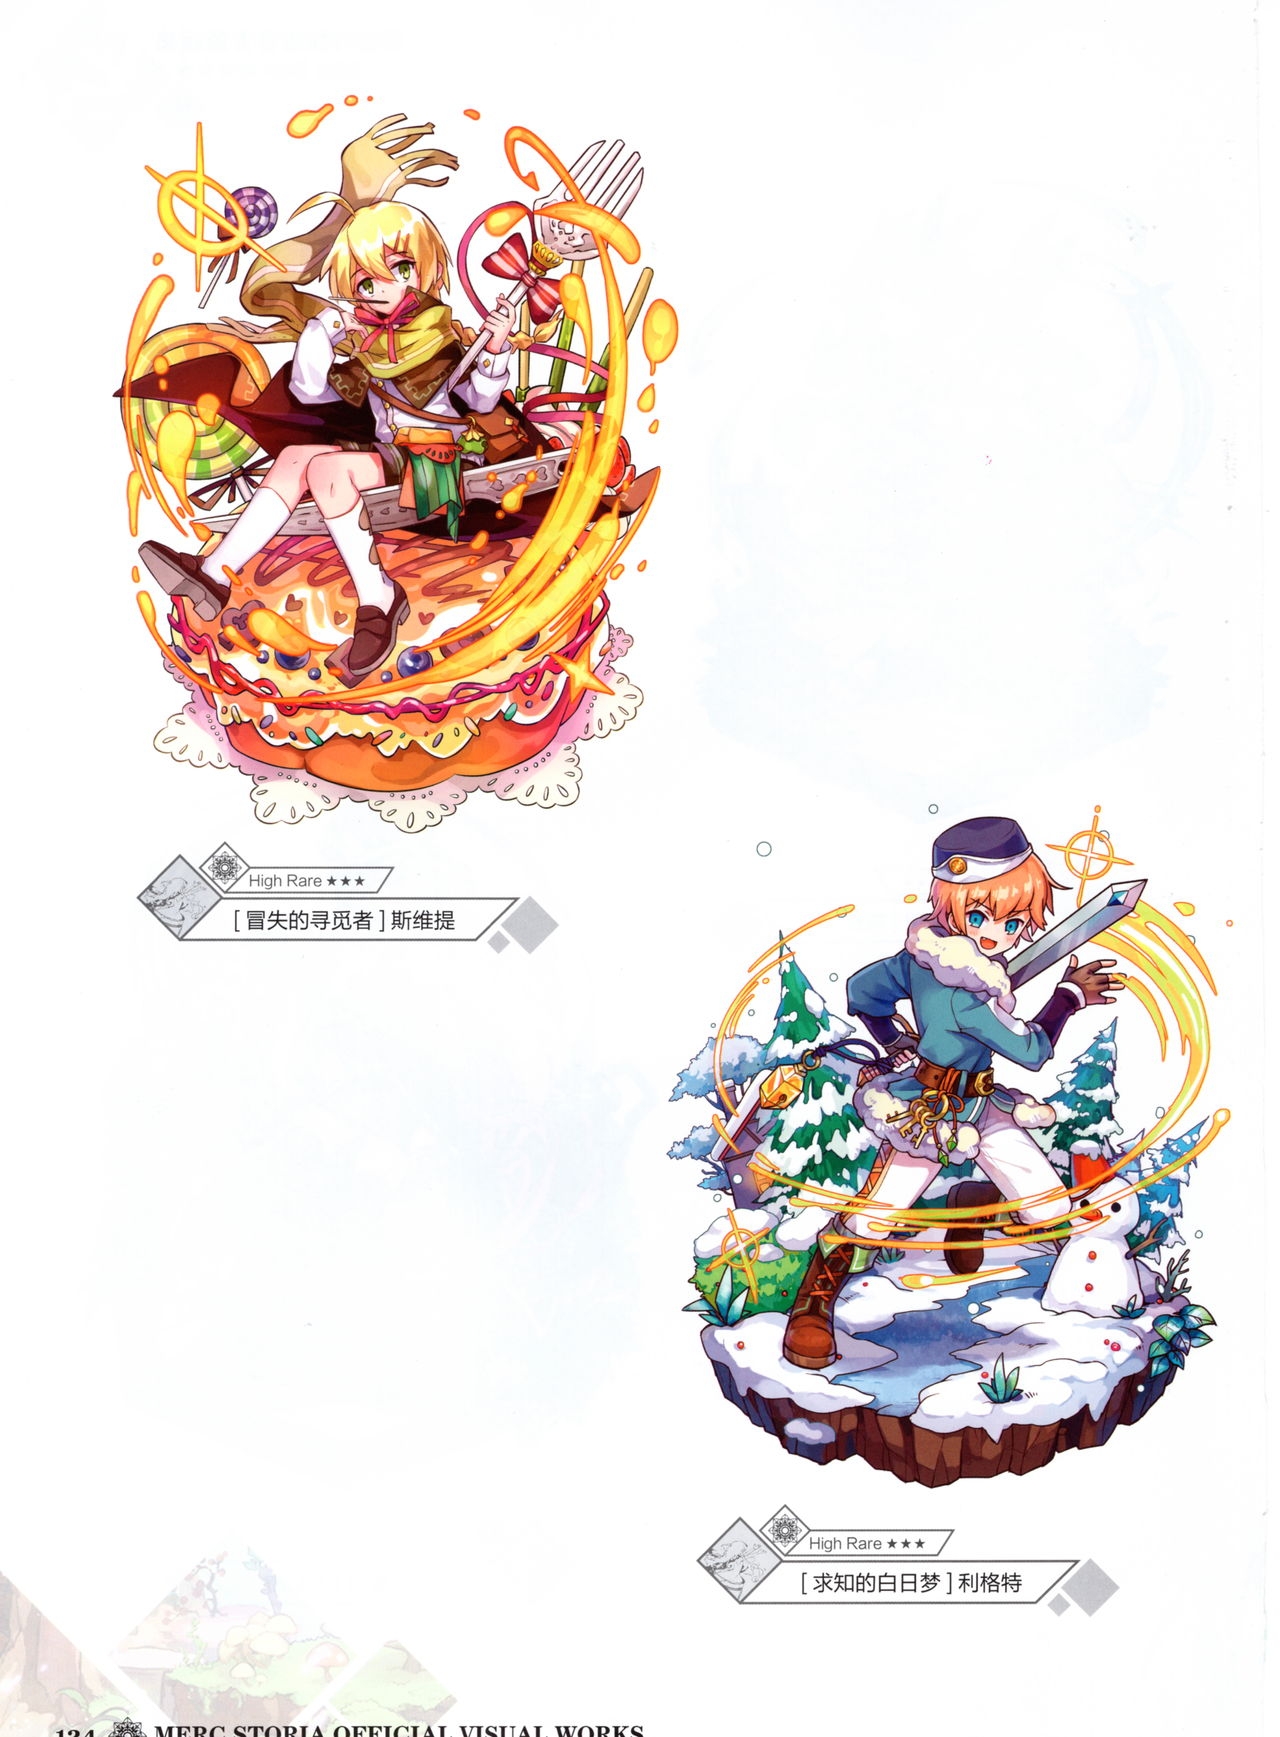 Merc Storia Official Visual Works [Chinese] 126